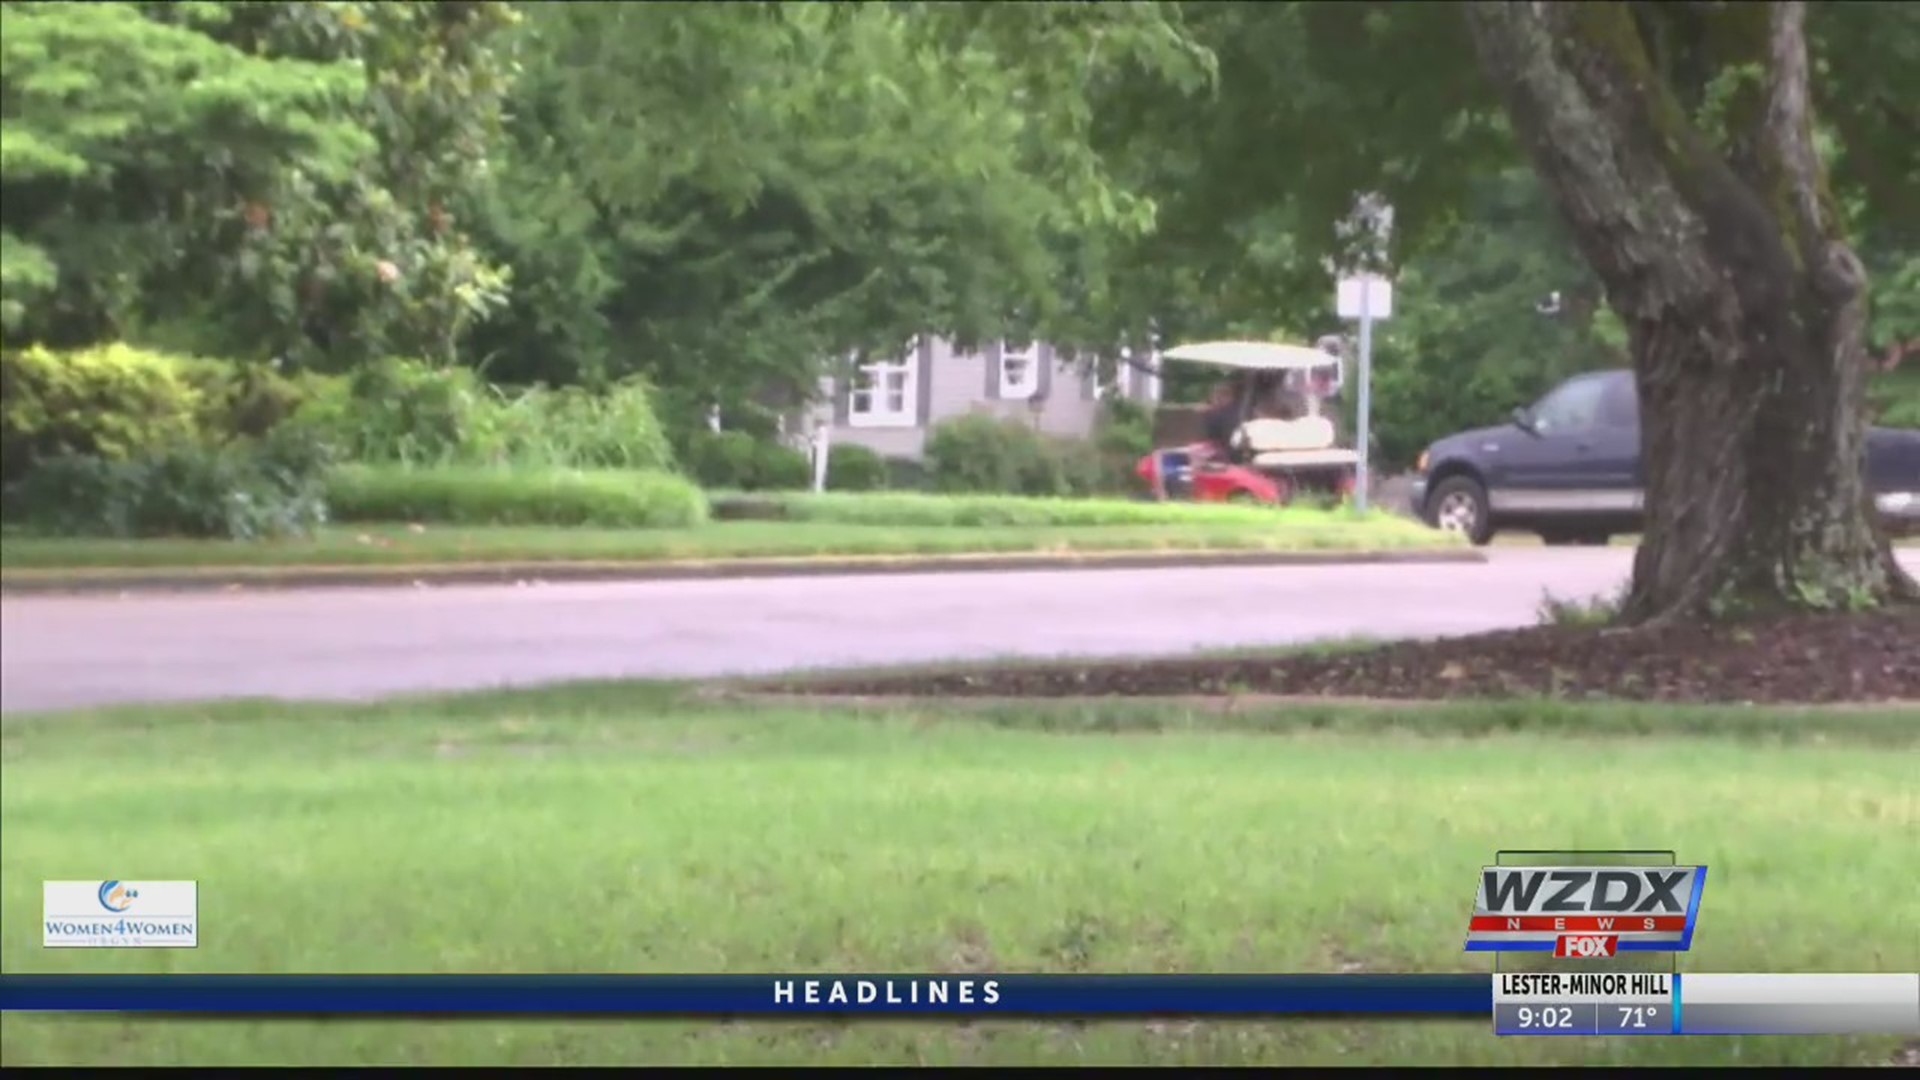 Golf cart driving in neighborhood has some in community concerned |  rocketcitynow.com